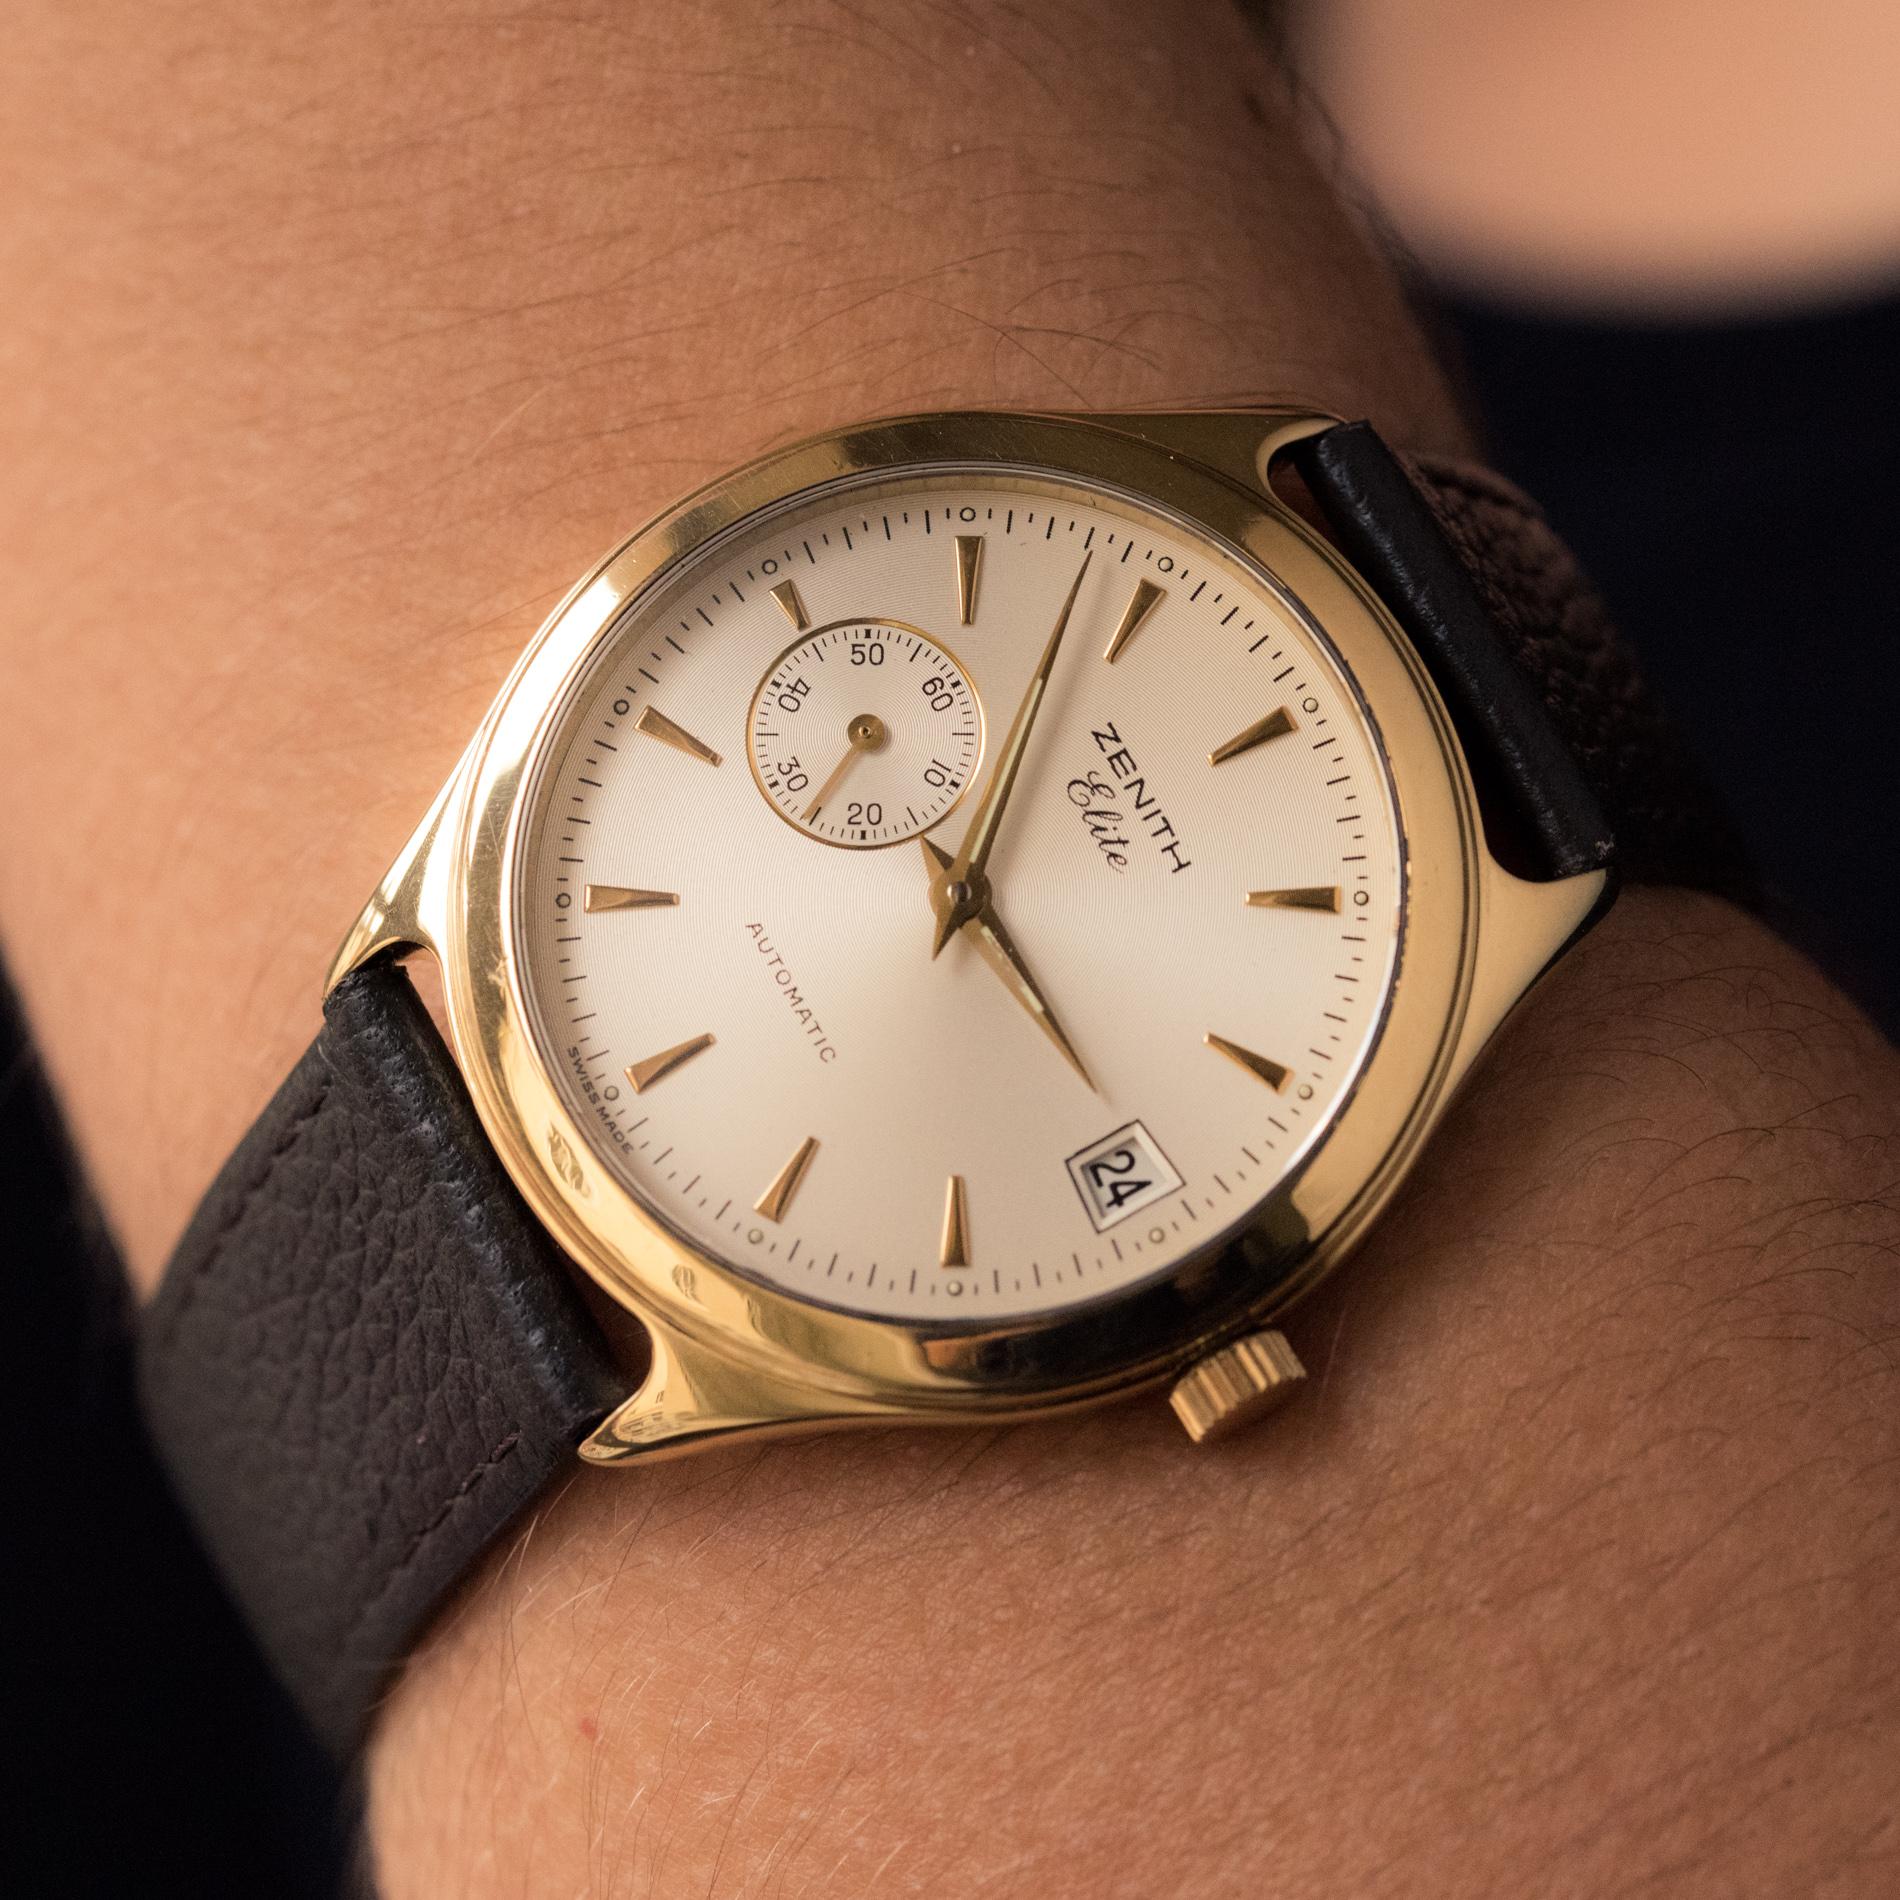 Bracelet watch for men in 18 karat yellow gold.
The dial is round, the background is creamy white stick figures, date at 3 o'clock, seconds dial at 9 o'clock.
Automatic movement with manual winding.
Zenith Elite Automatic brand.
Skeleton back.
The